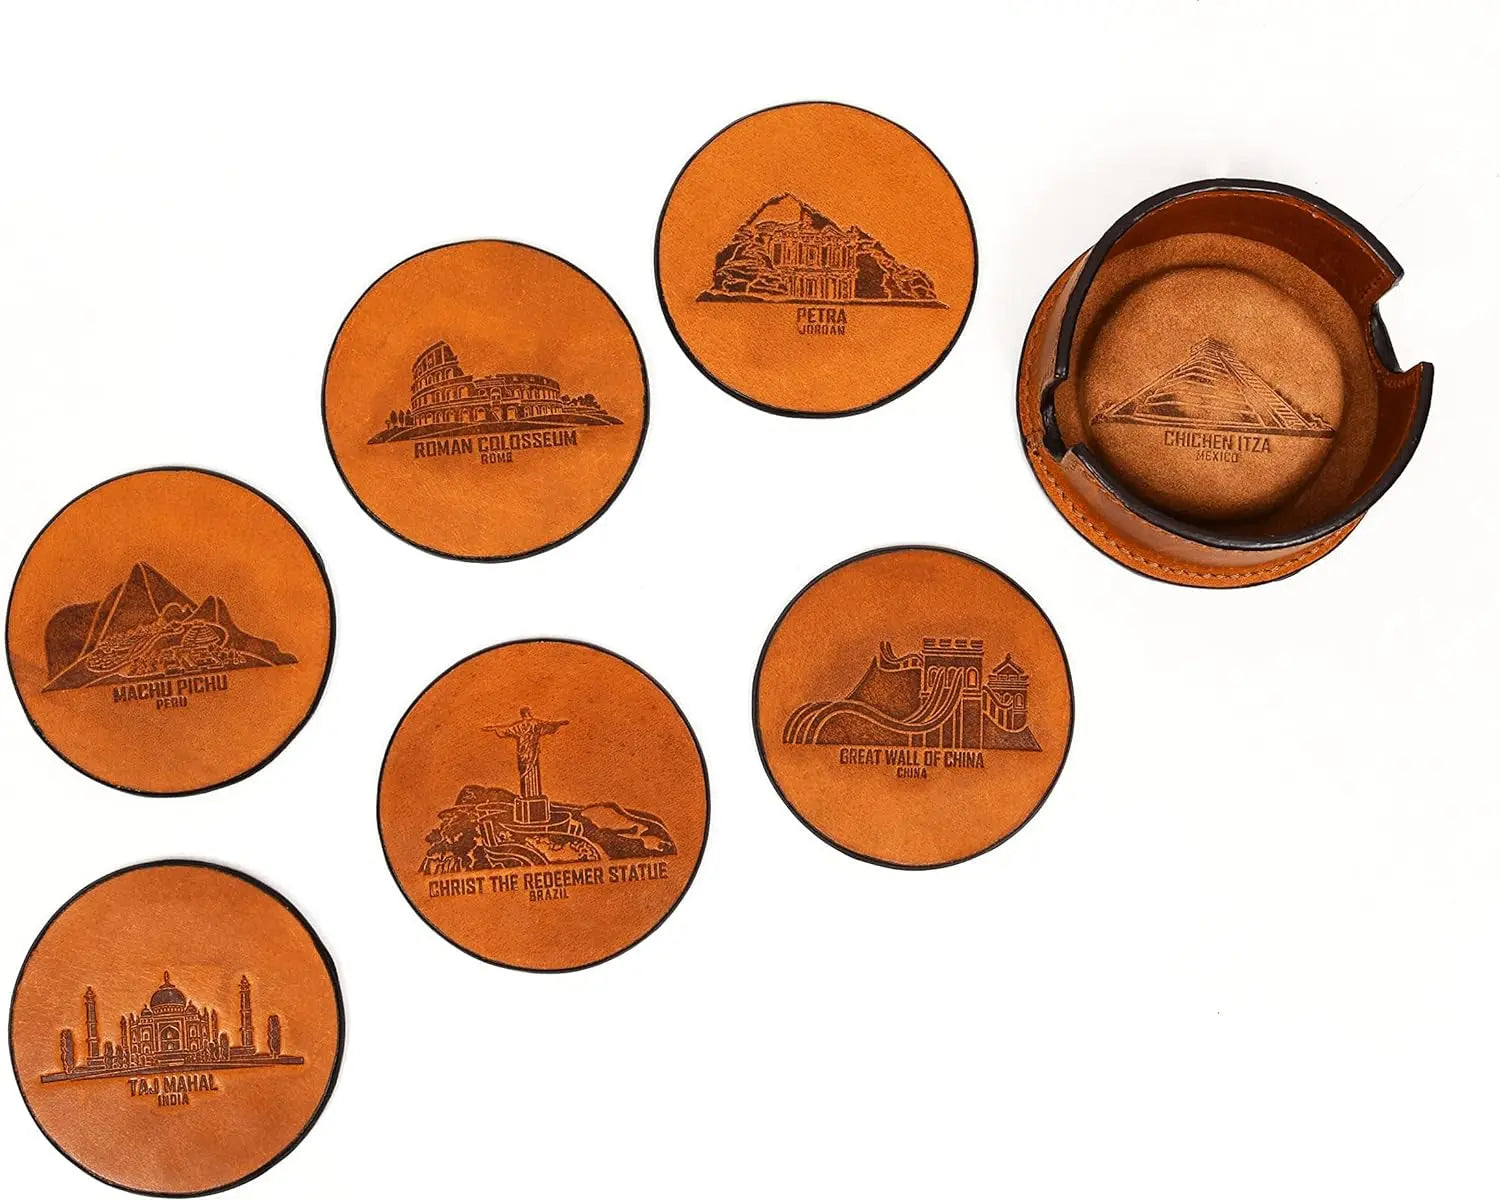 Leather Coasters for Drinks Set of 6 with Holder-Protect Your Furniture from Stains (Walnut)